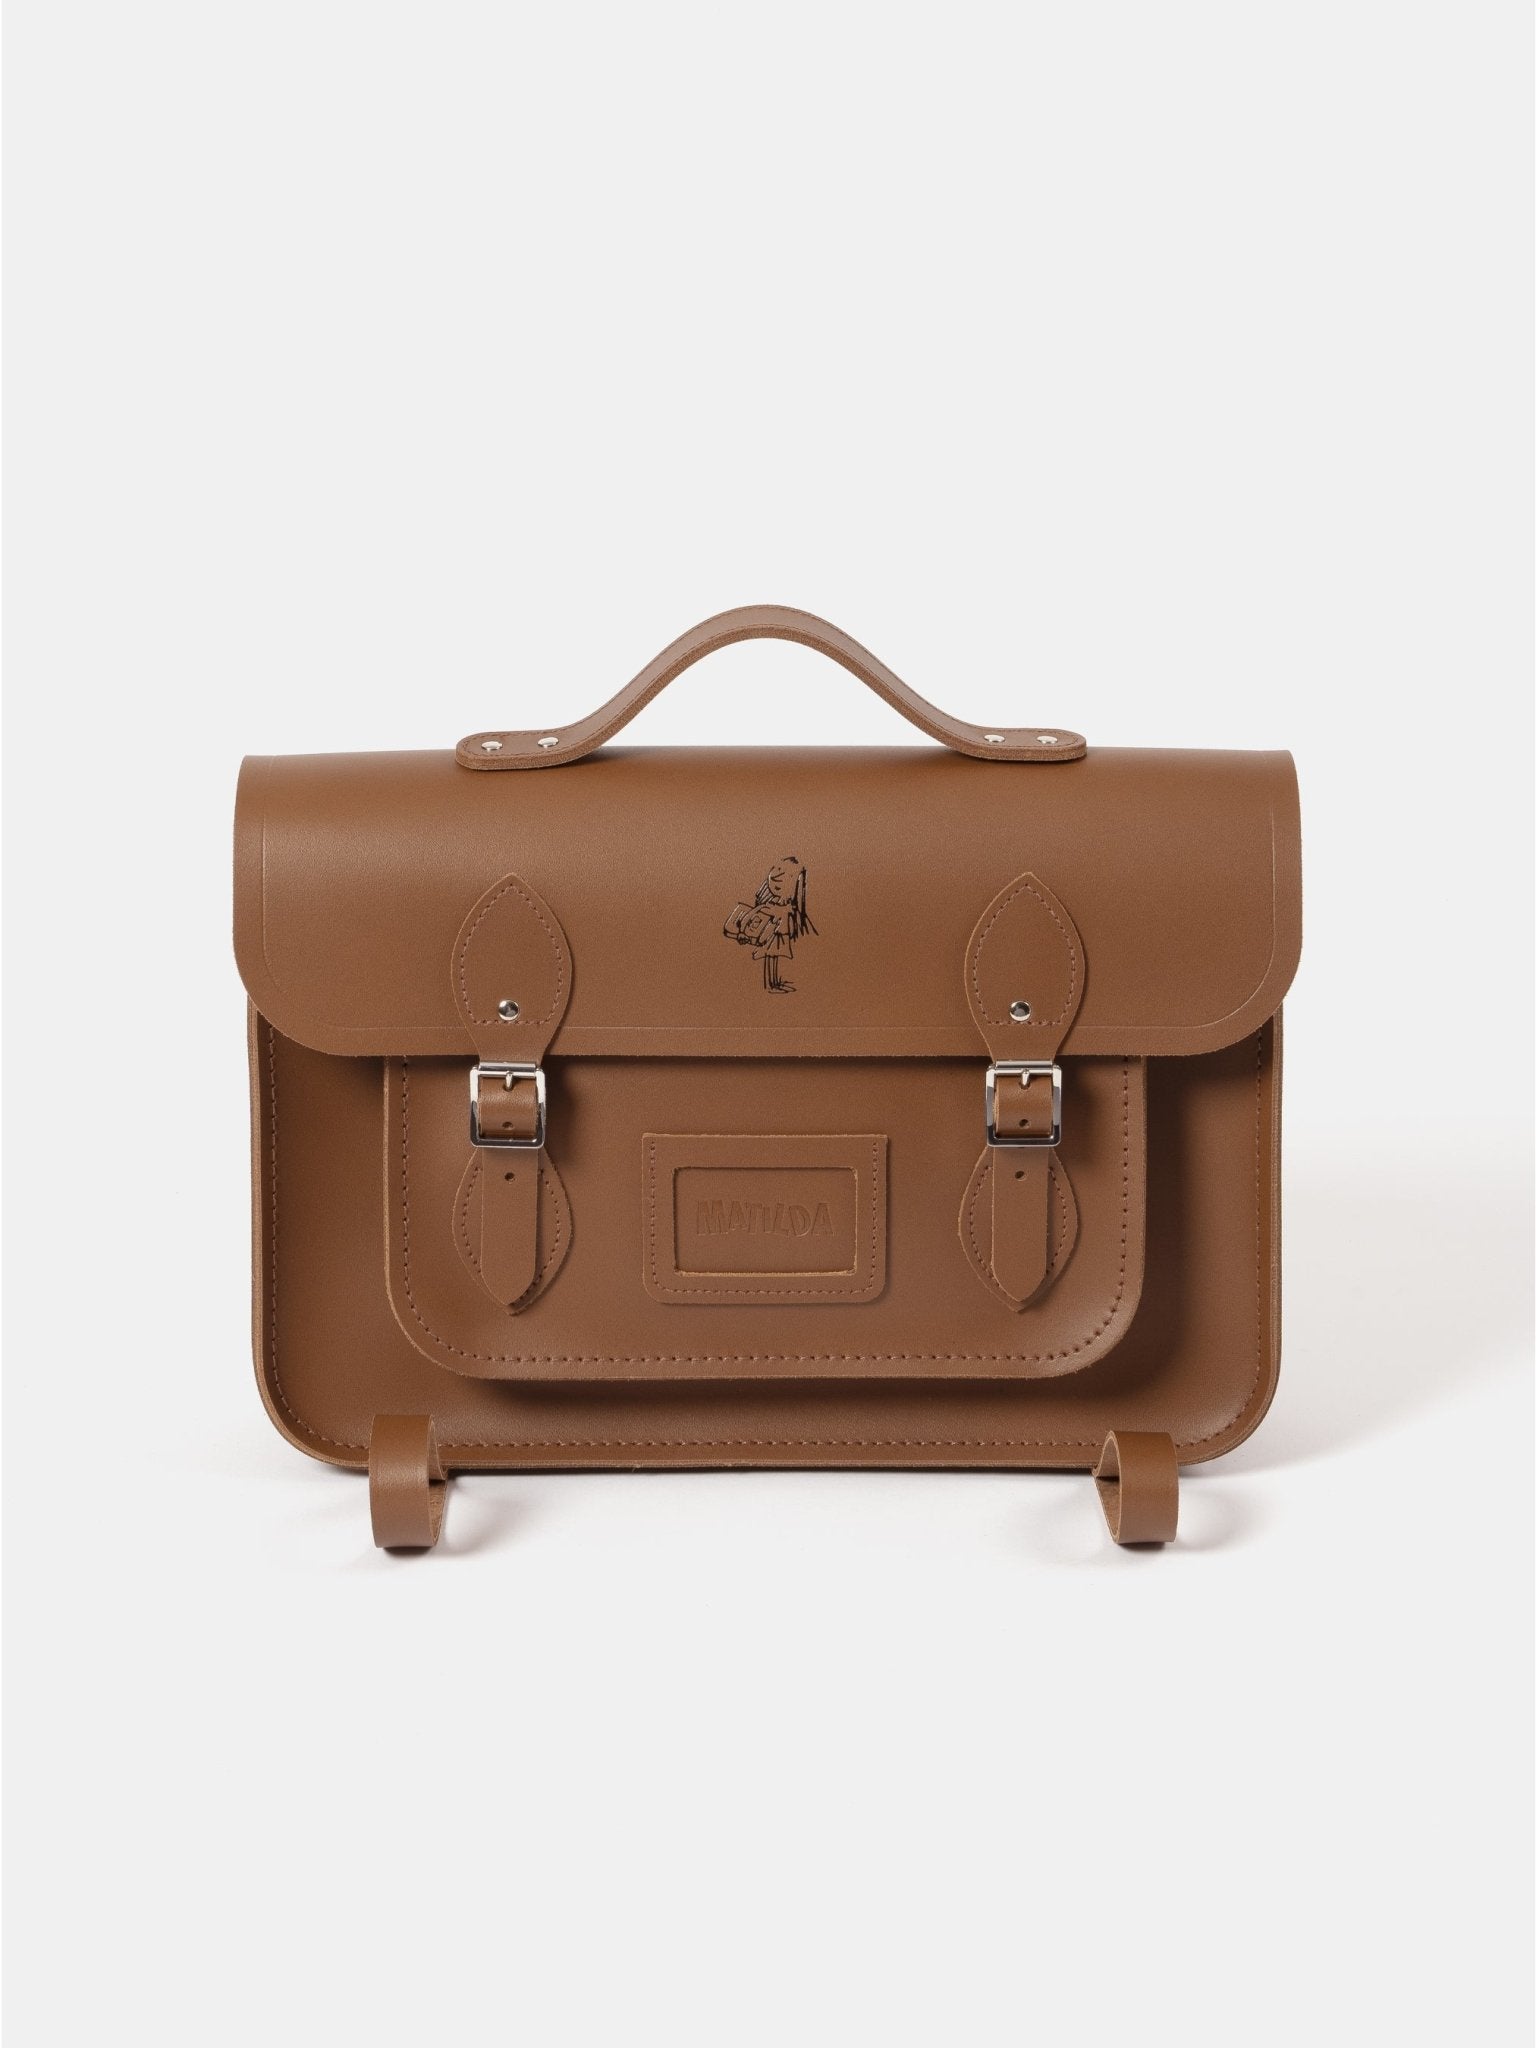 The Cambridge Satchel Co. Unisex Brown Backpack product